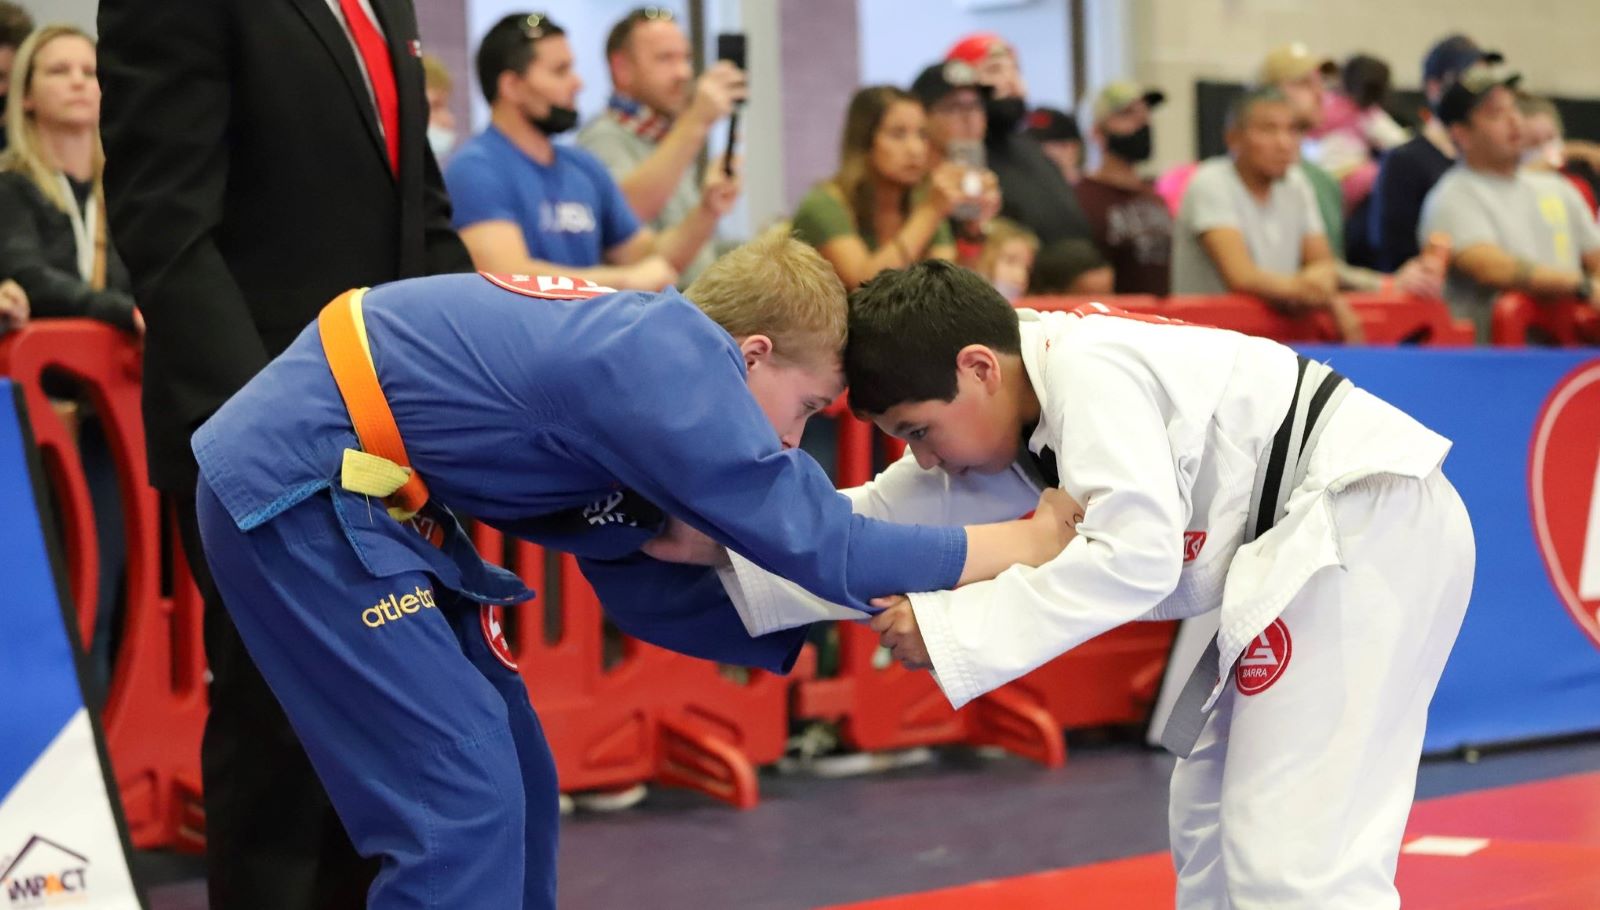 Martial Arts Training for Kids Near Me Pacific, MO | Pacific, MO Kids Martial Arts | Gracie Barra Washington